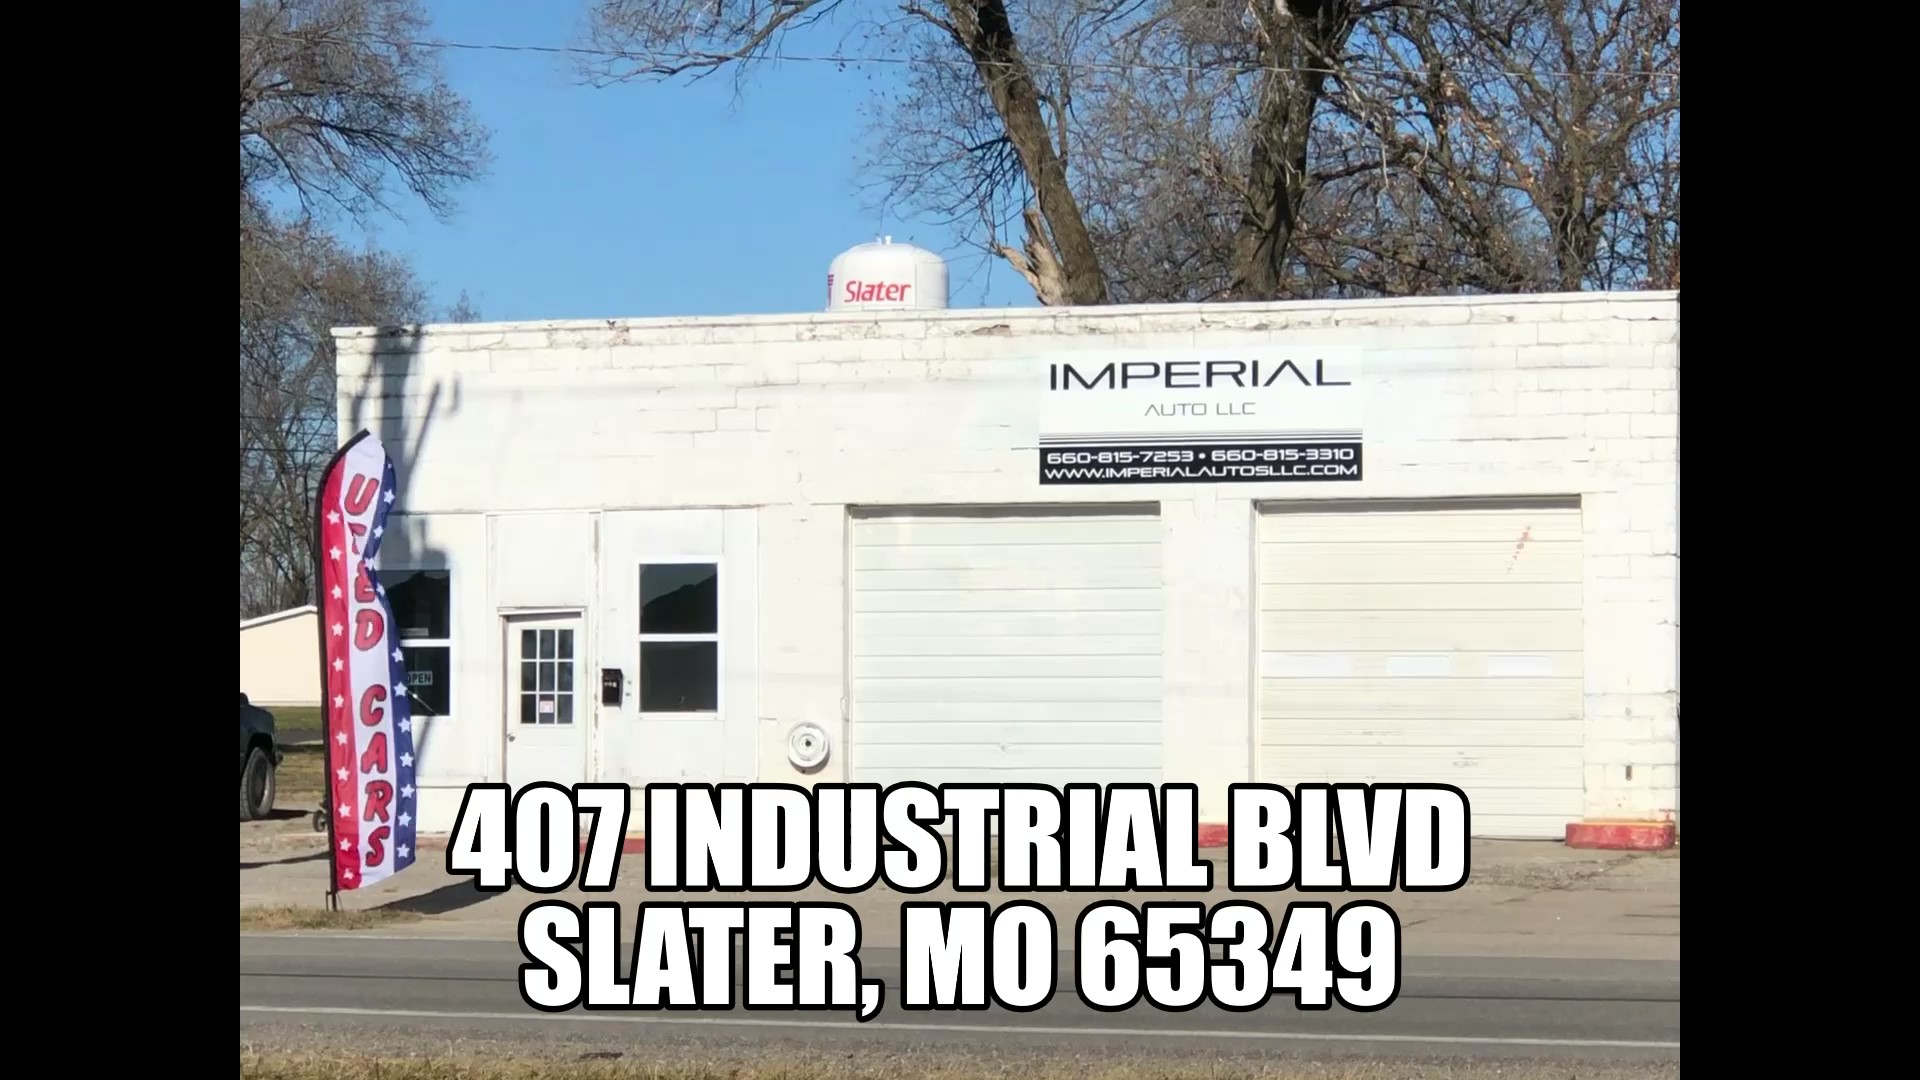 Imperial Auto llc of Slater